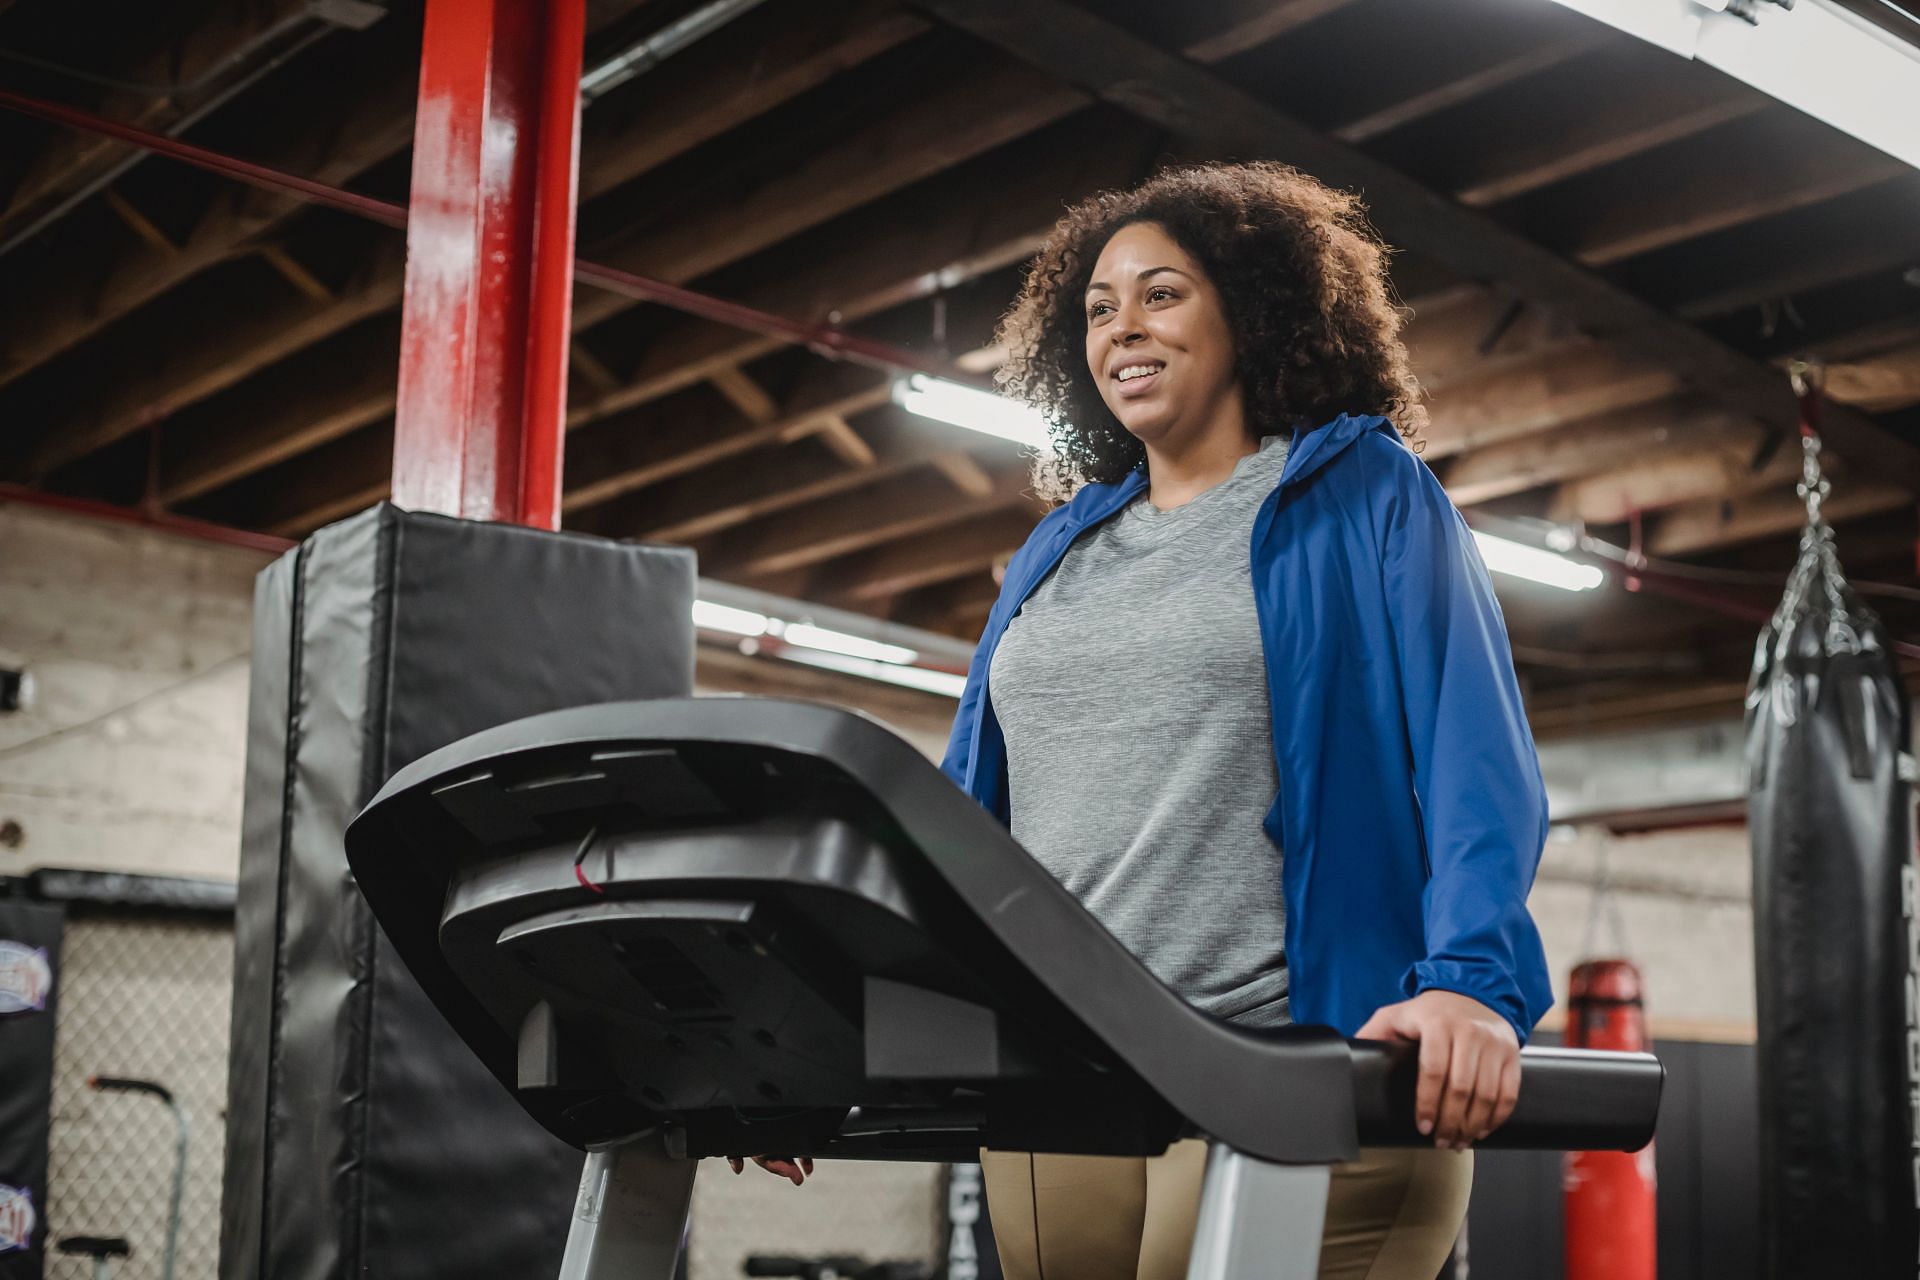 30-minutes a Day on the Treadmill - Lifestyle Change for a Better Tomorrow